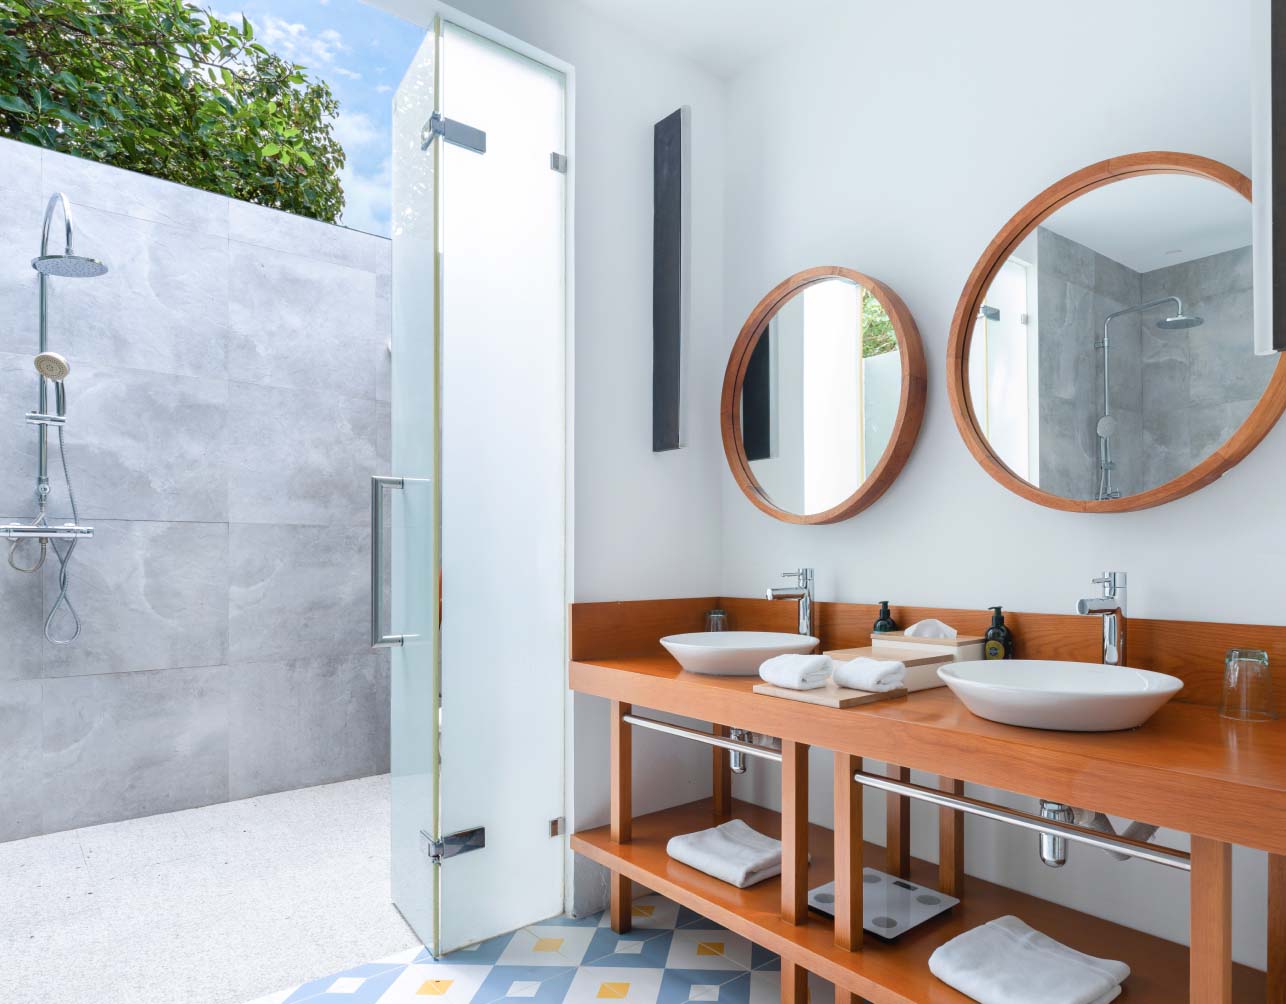 An outdoor garden shower just outside on of the spacious ensuite bathrooms in our Private Residence in the Maldives.